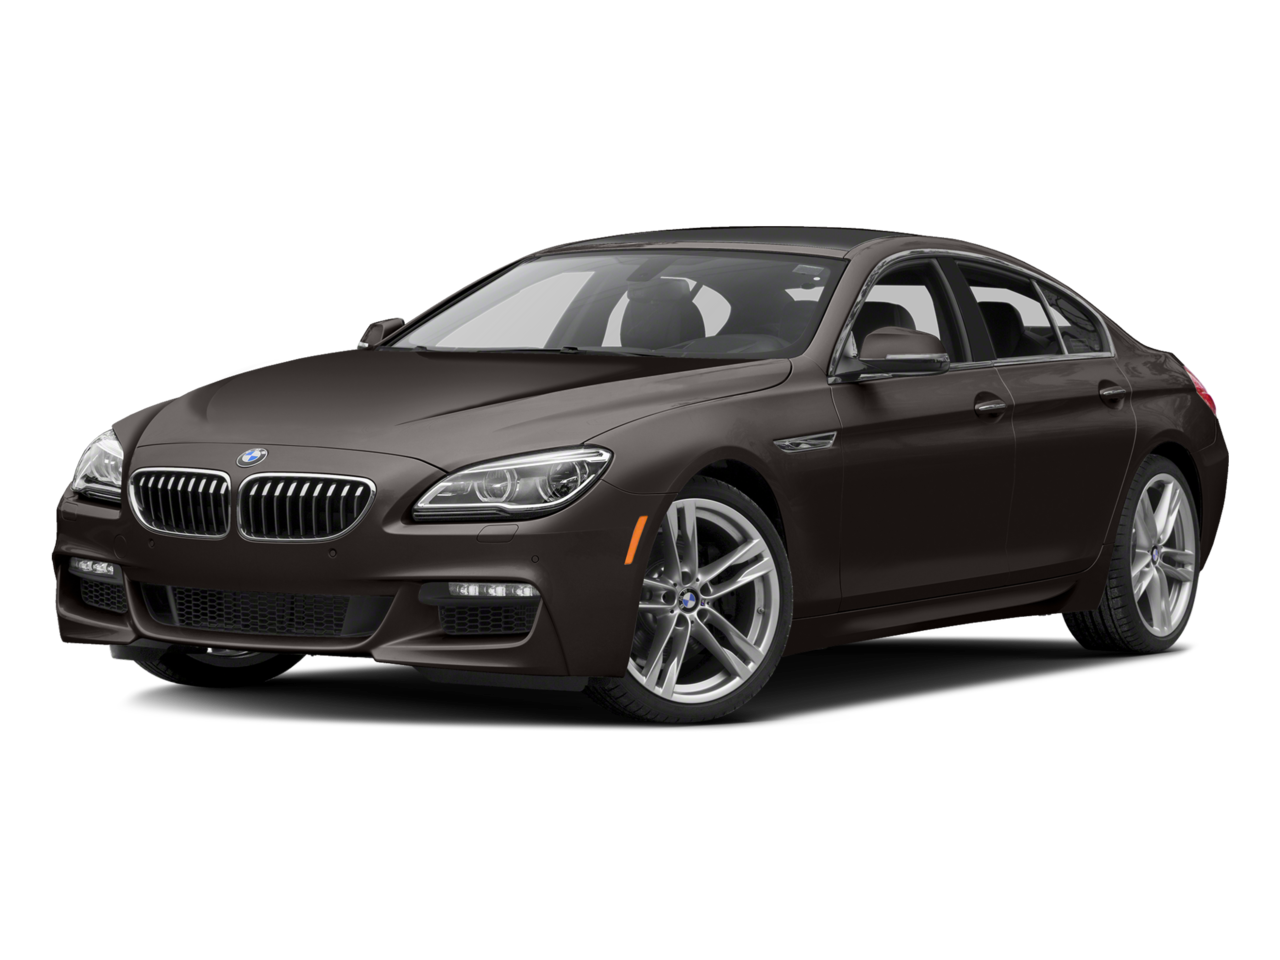 2016 BMW 640i xDrive Gran Coupe Repair: Service and Maintenance Cost